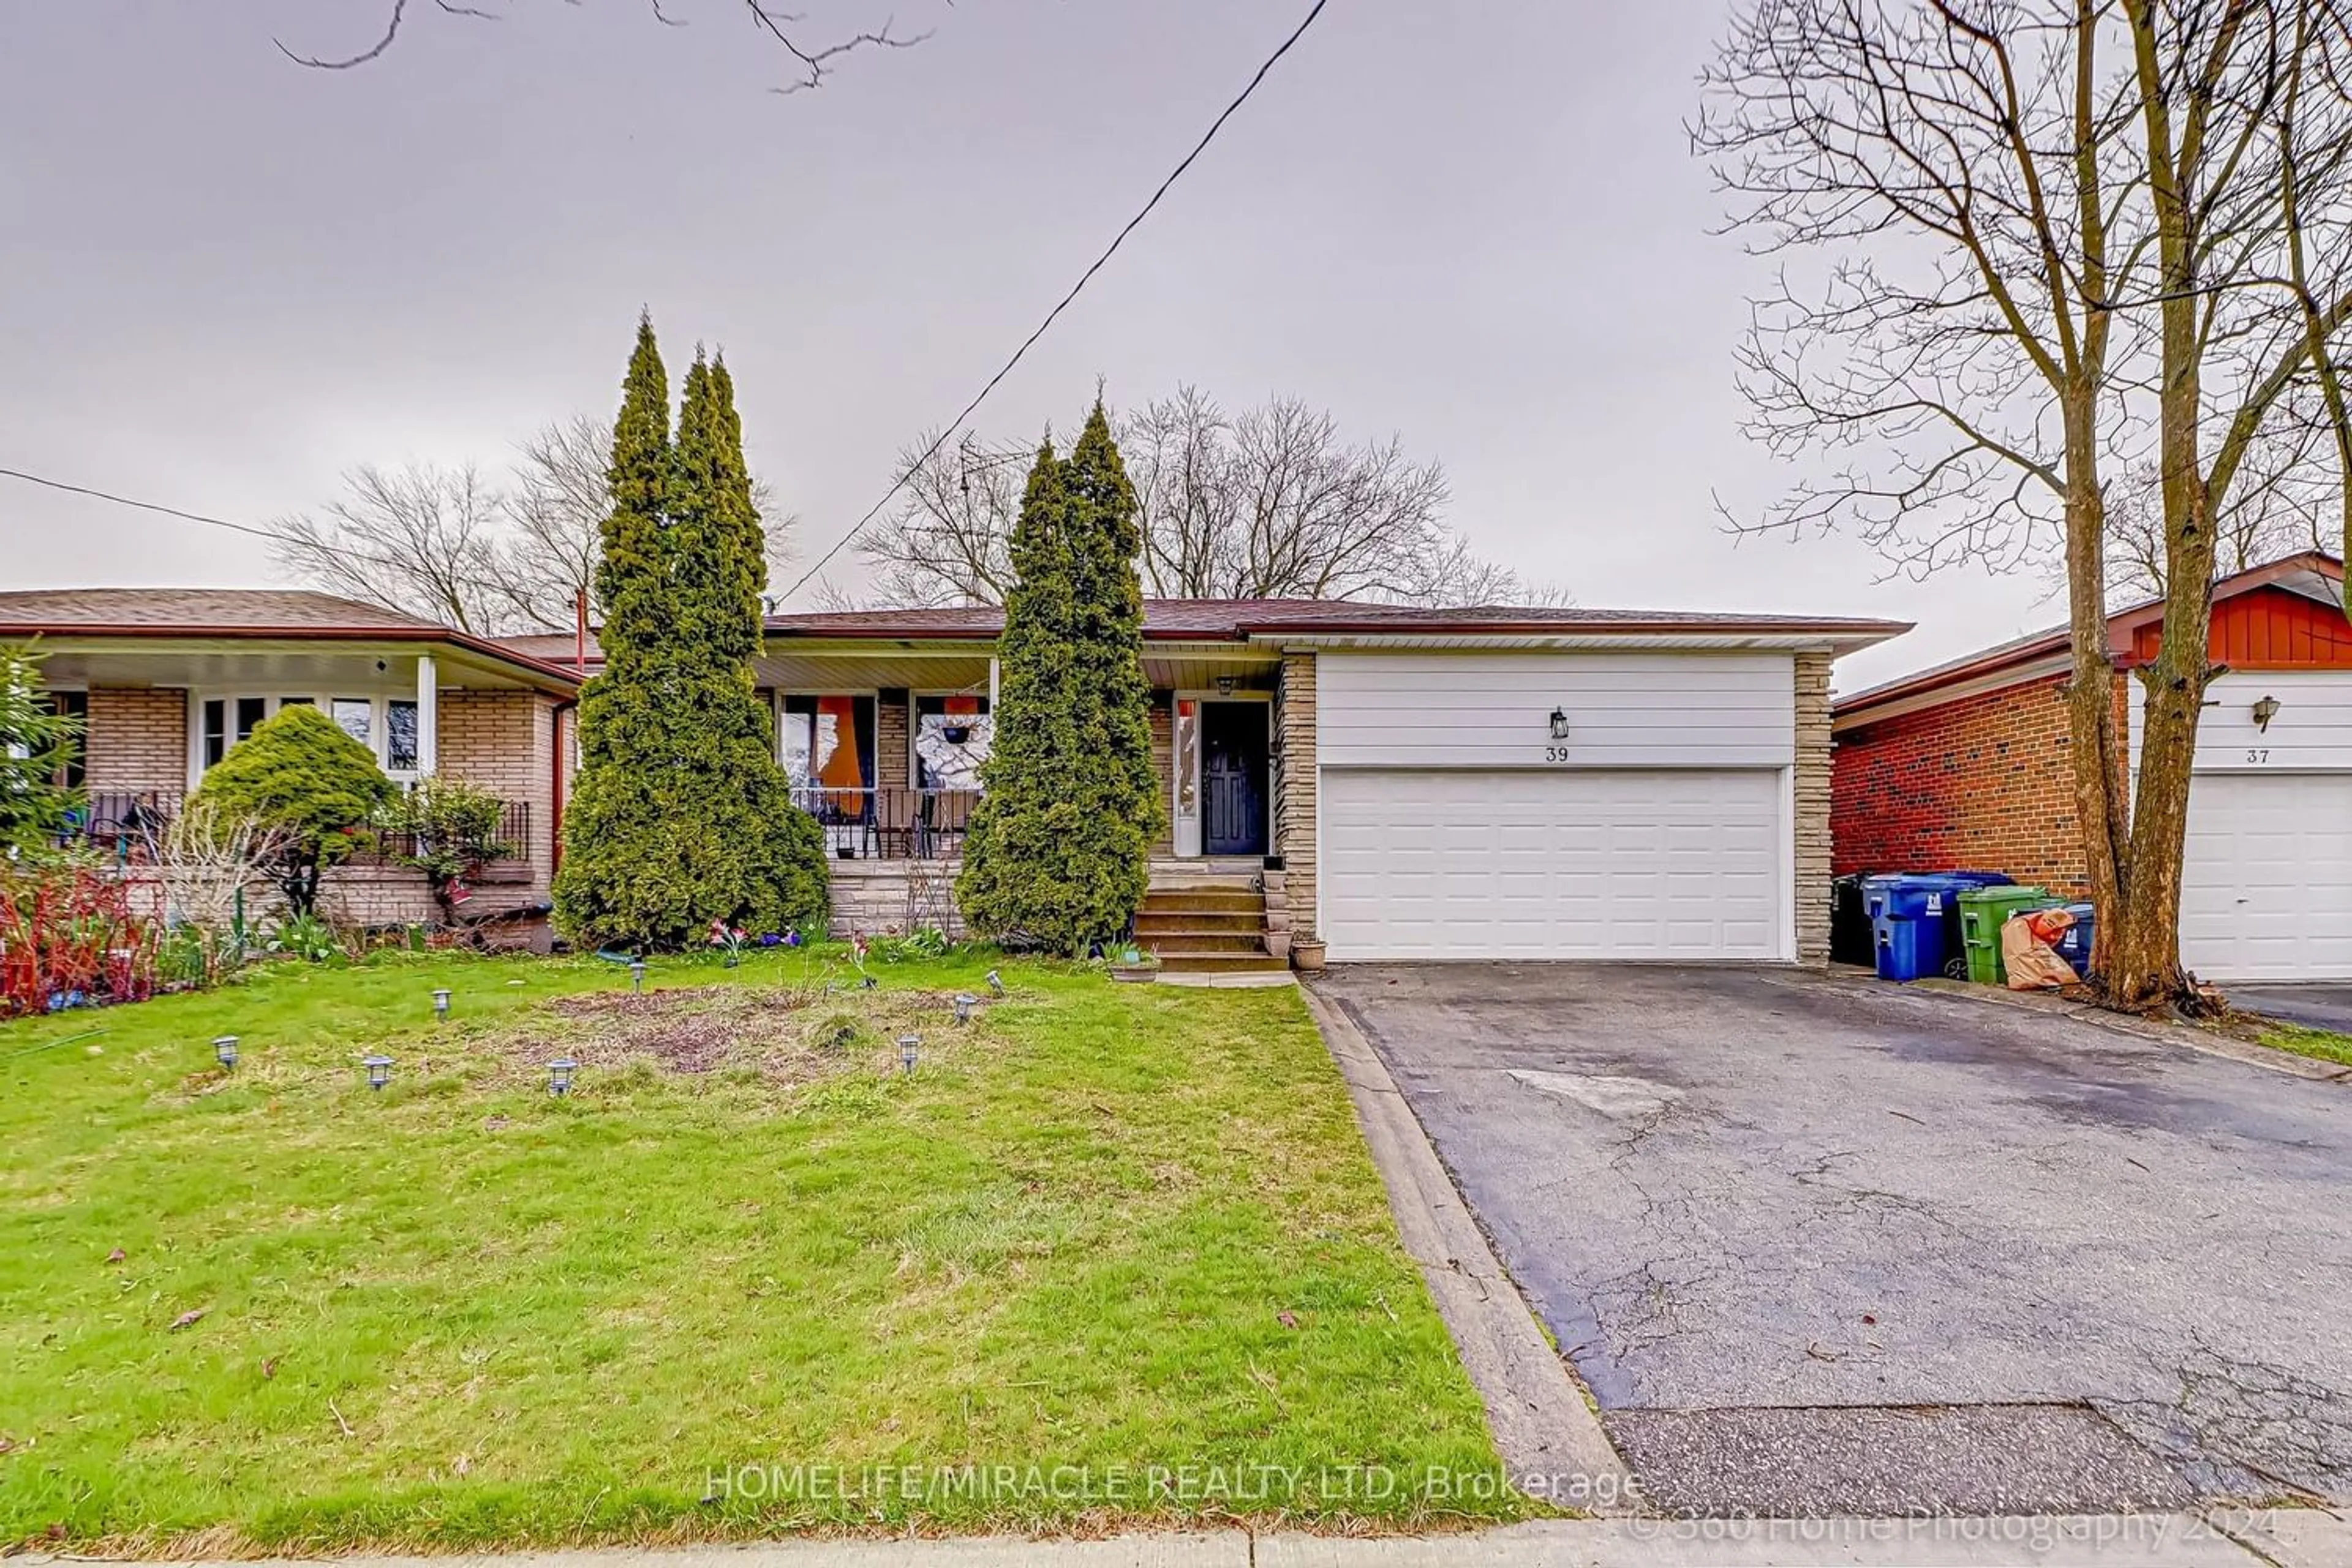 Frontside or backside of a home for 39 Shoreview Dr, Toronto Ontario M1E 3R1